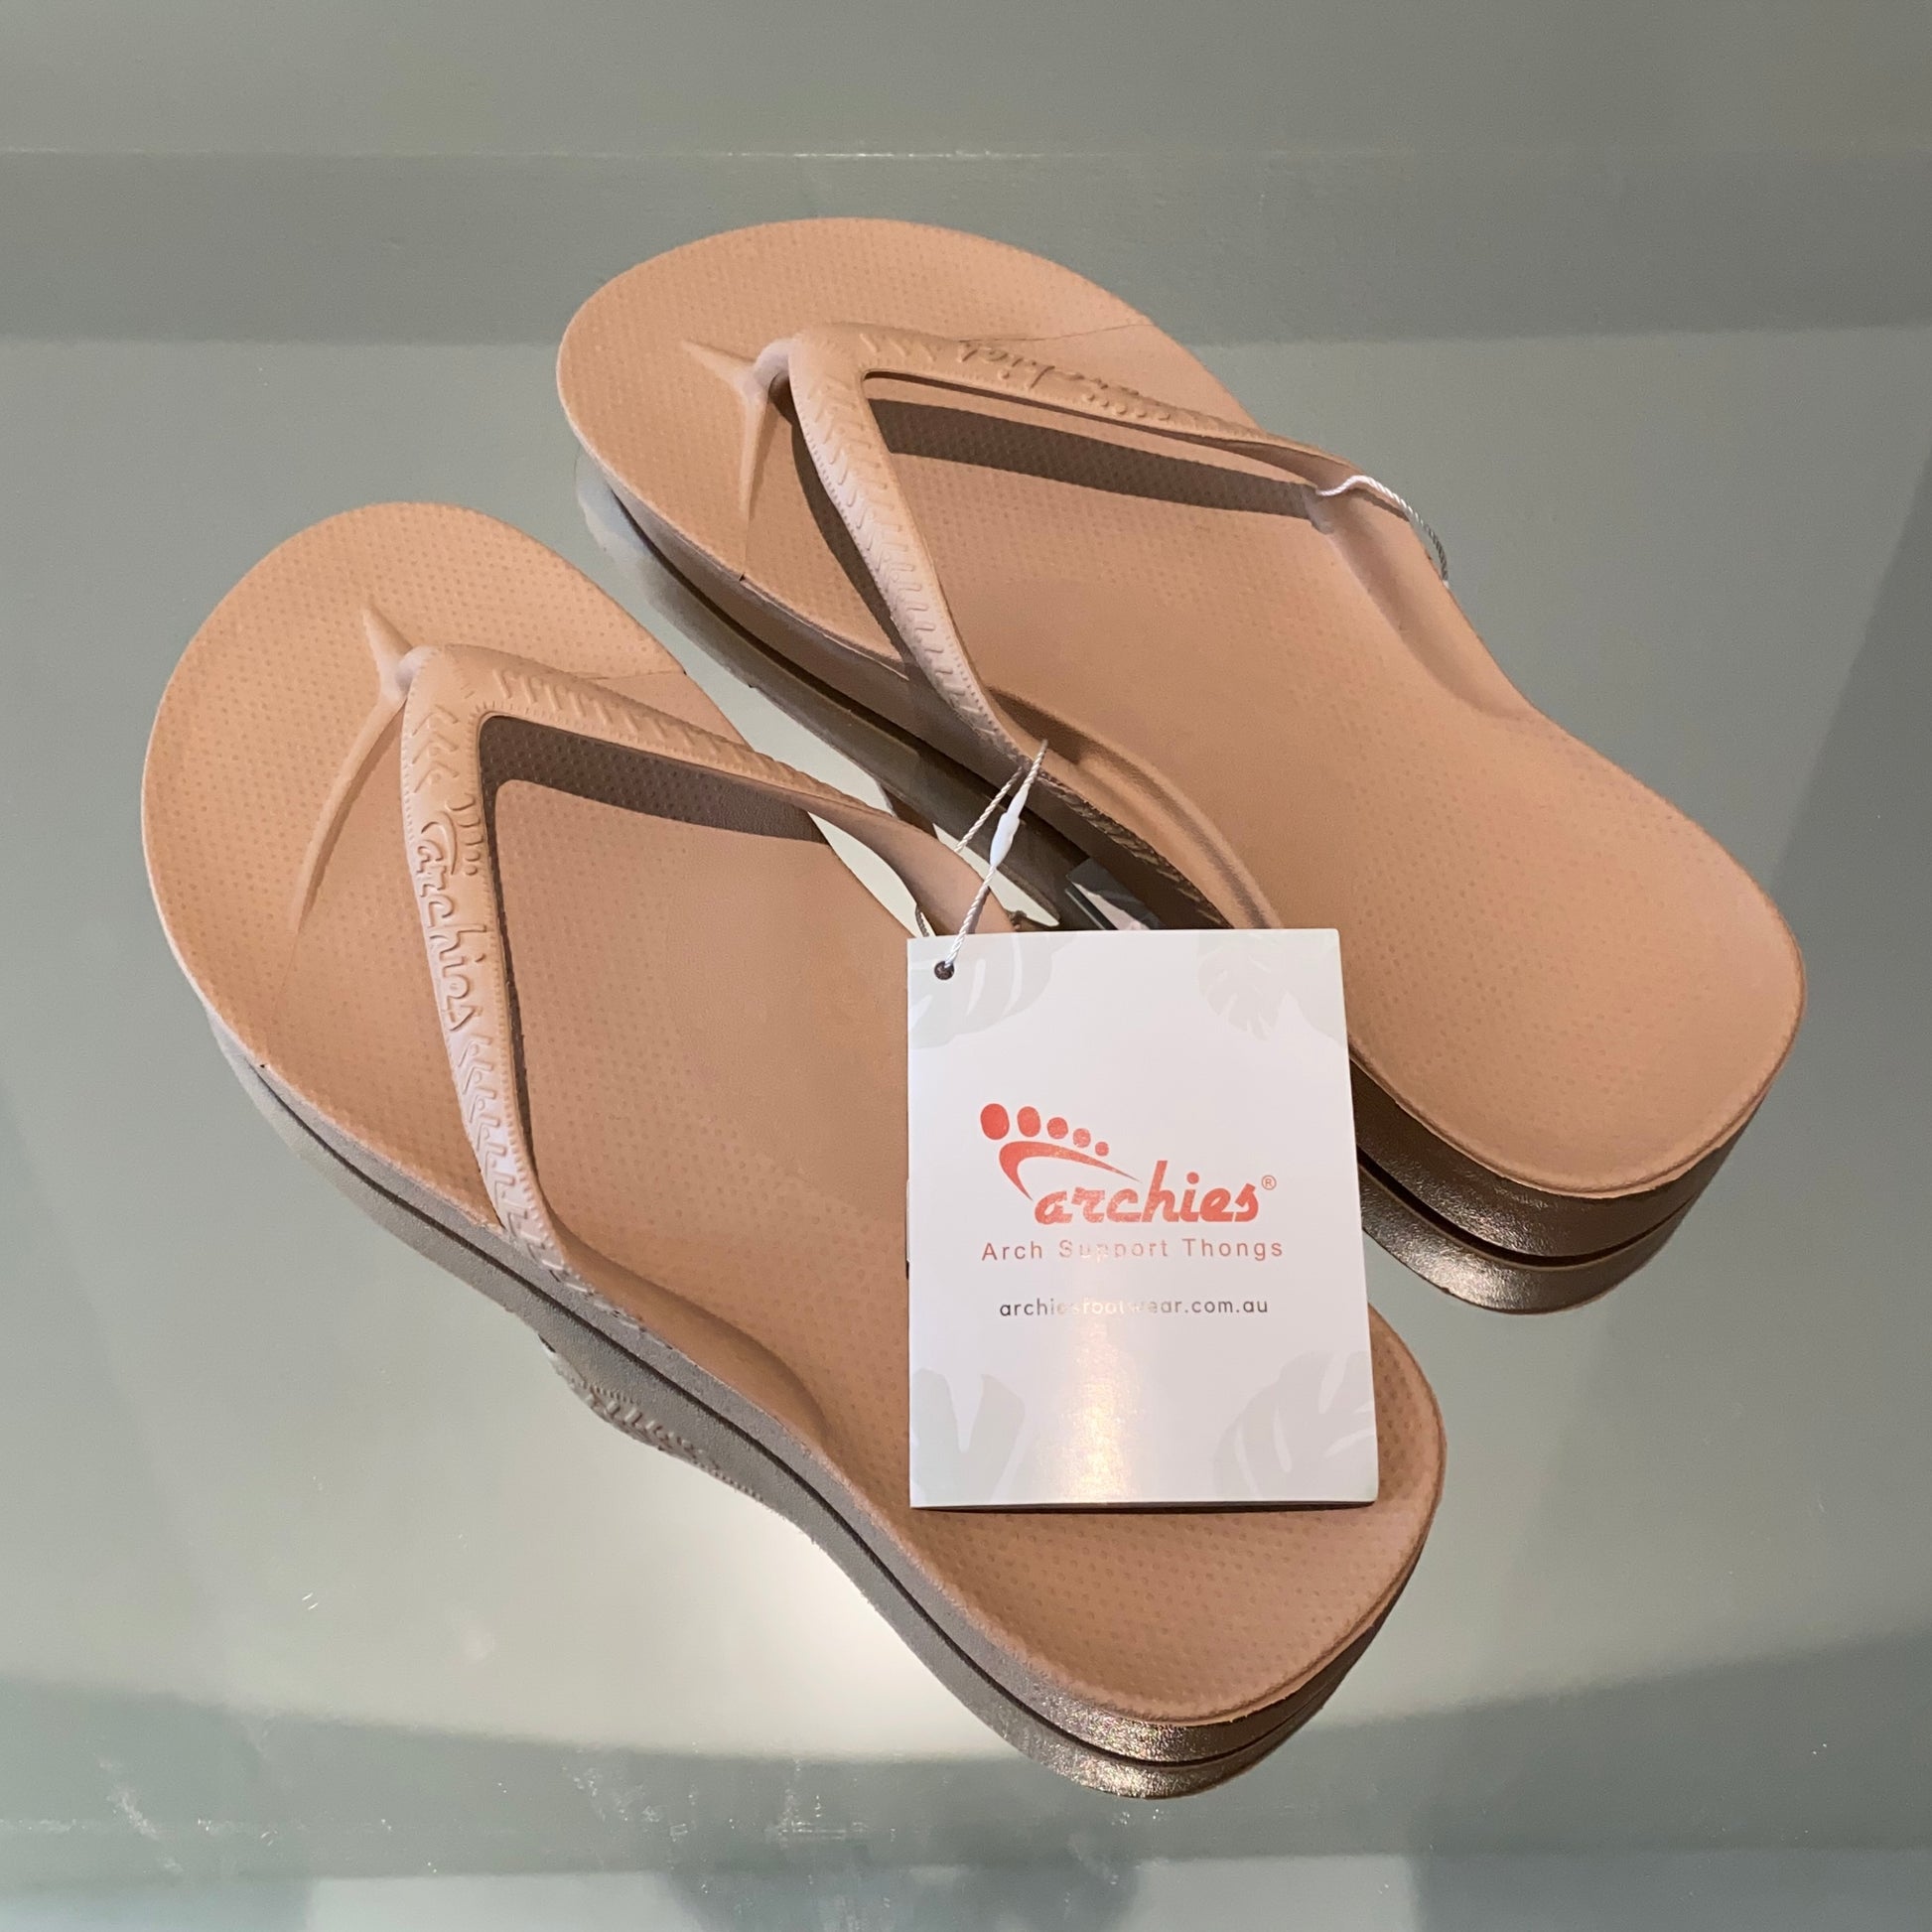 Archies Thongs – Bayswater Podiatry Foot Ankle Clinic